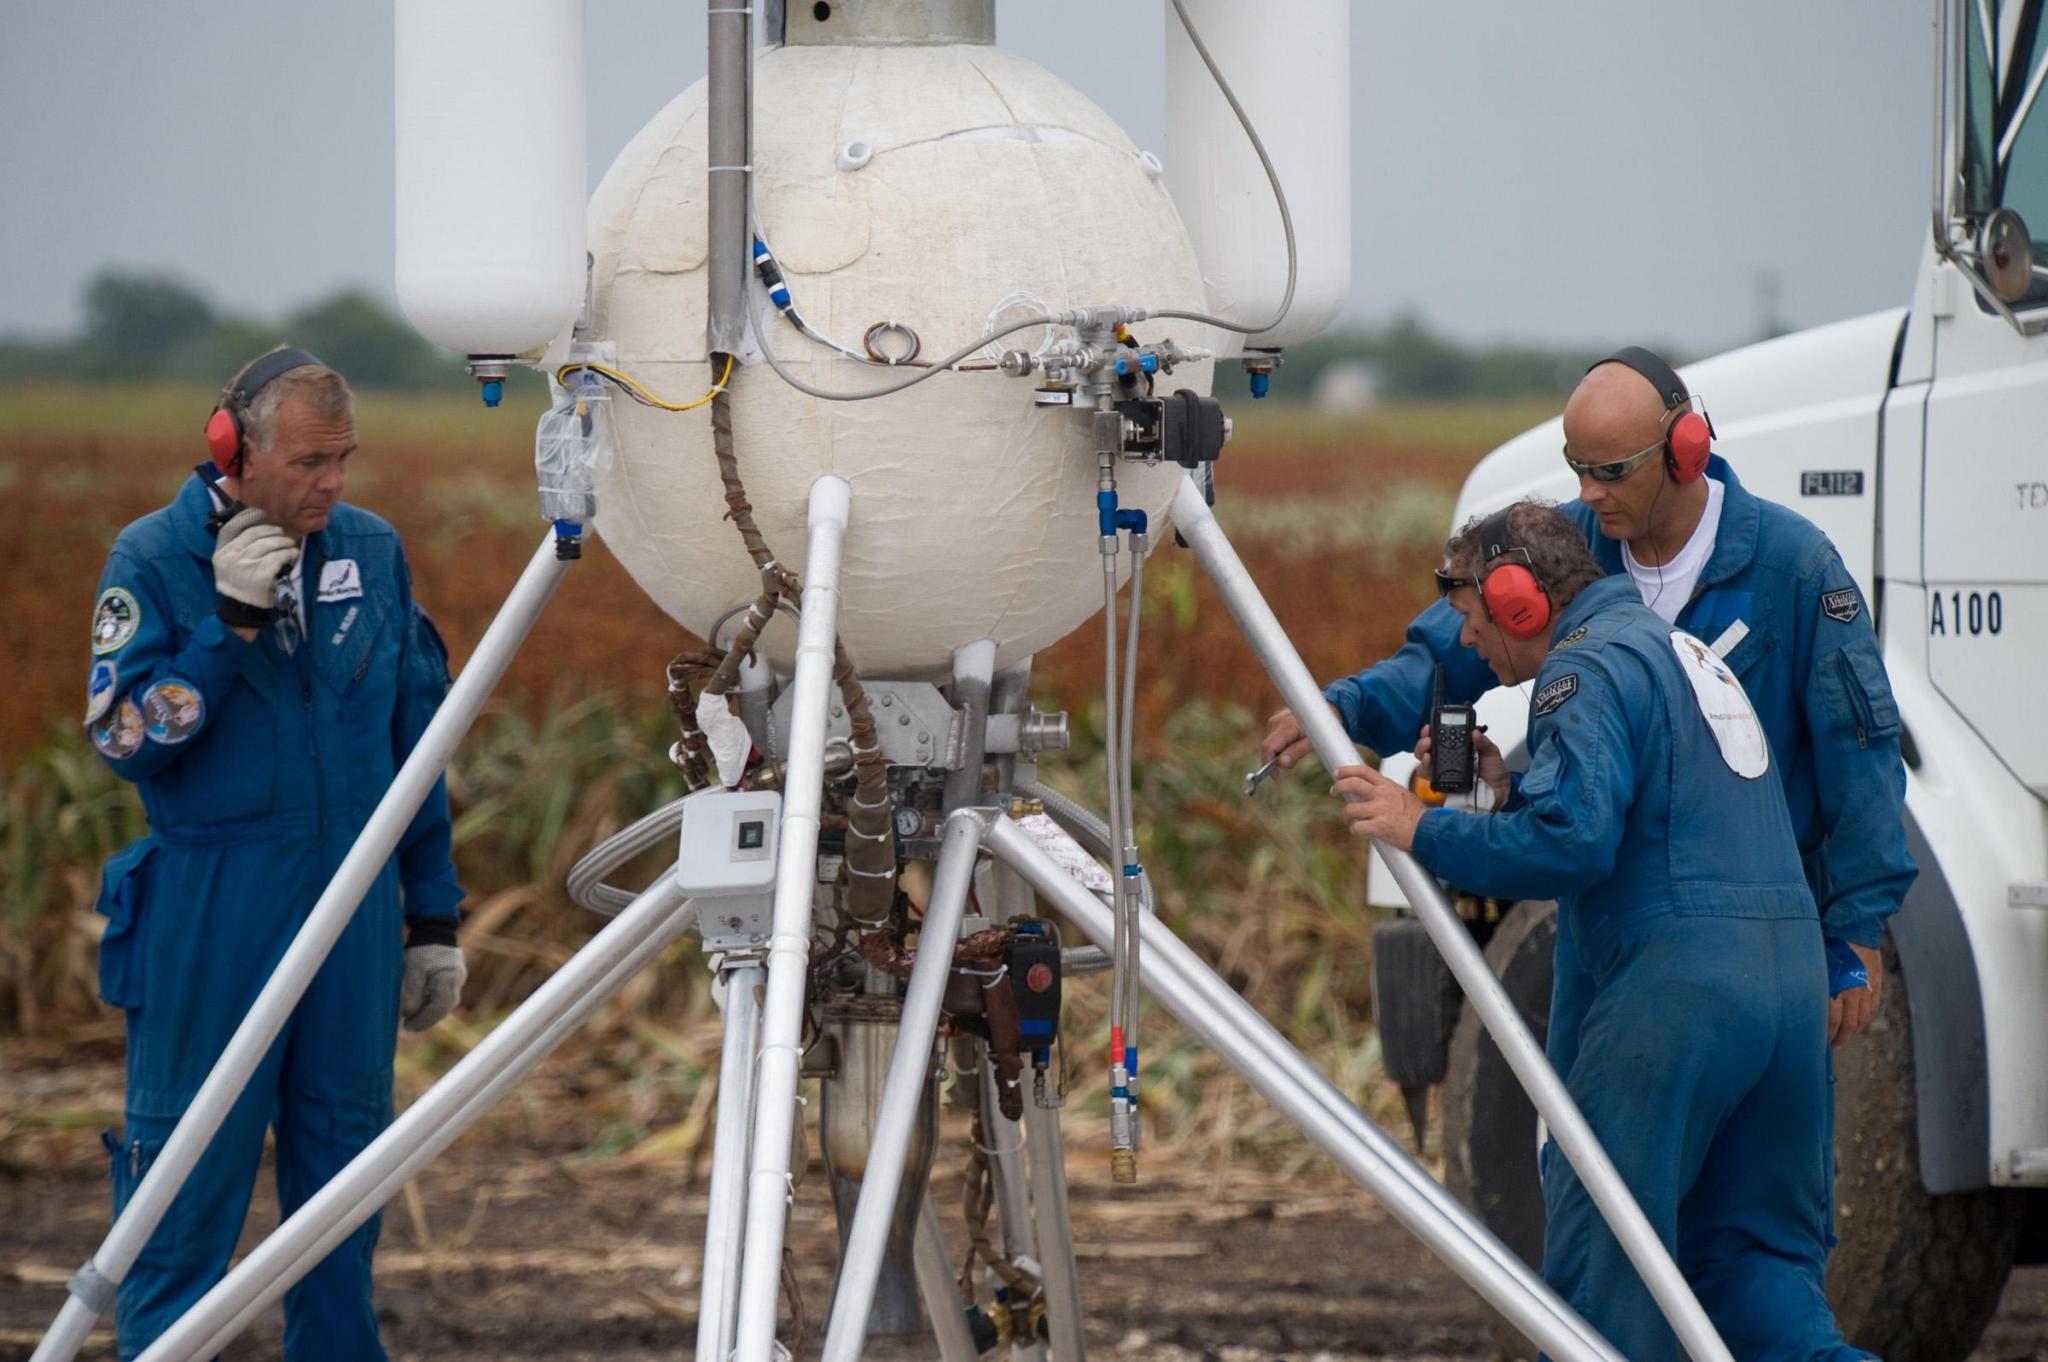 Three light-skinned men stand around a white rocket-like structure, which features a spherical object atop a four-legged metal stand. There are fuel tanks, valves, wires, and other mechanisms all over the body and base of the rocket. The men are each wearing blue jumpsuits and black and red safety headphones. Behind the group, out of focus, is a corn field and overcast sky.